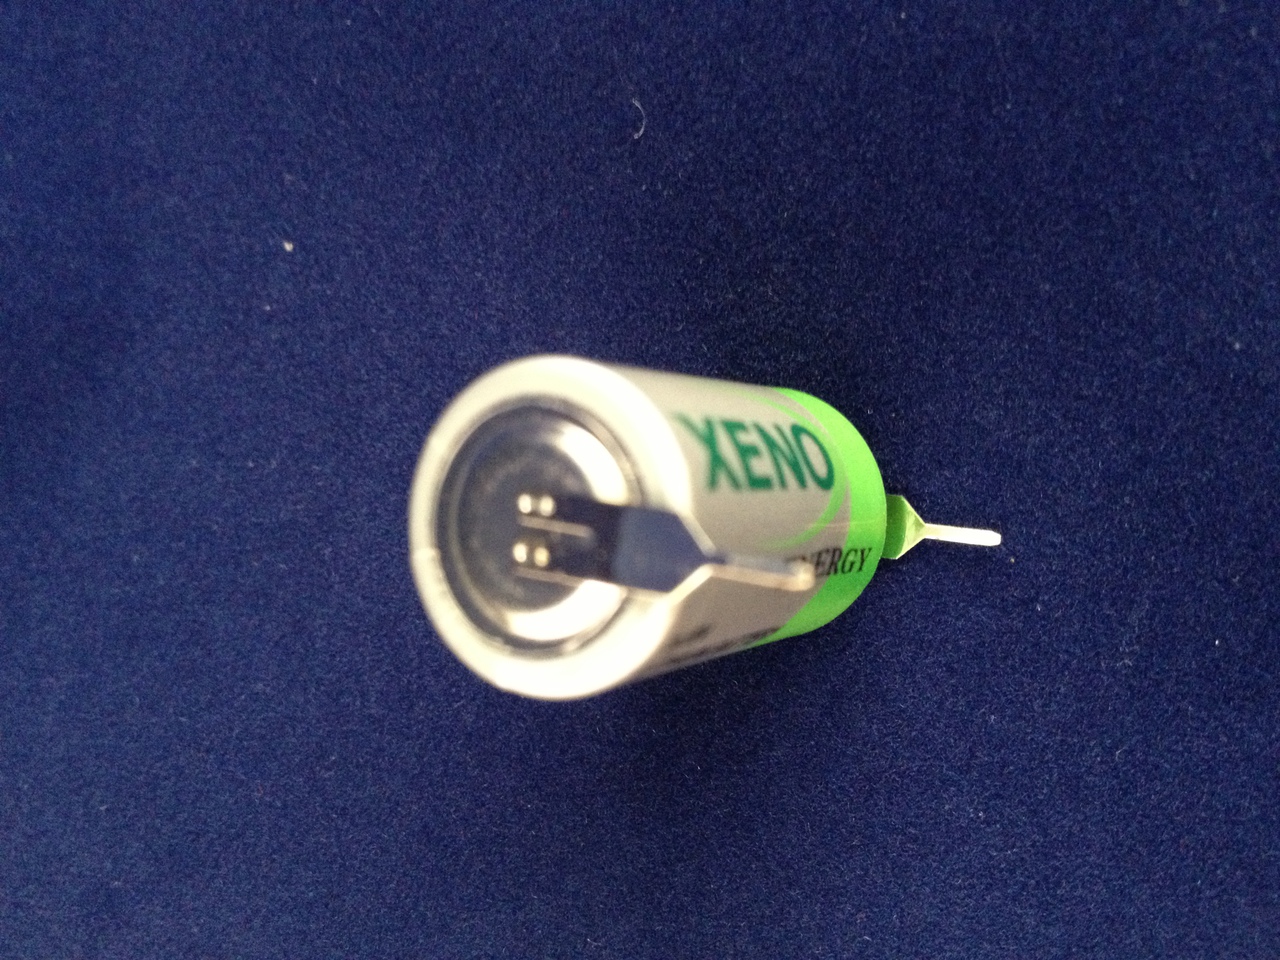 Xeno 1/2 AA Size 3.6V Lithium Battery With Solder Tabs XL-050FT2